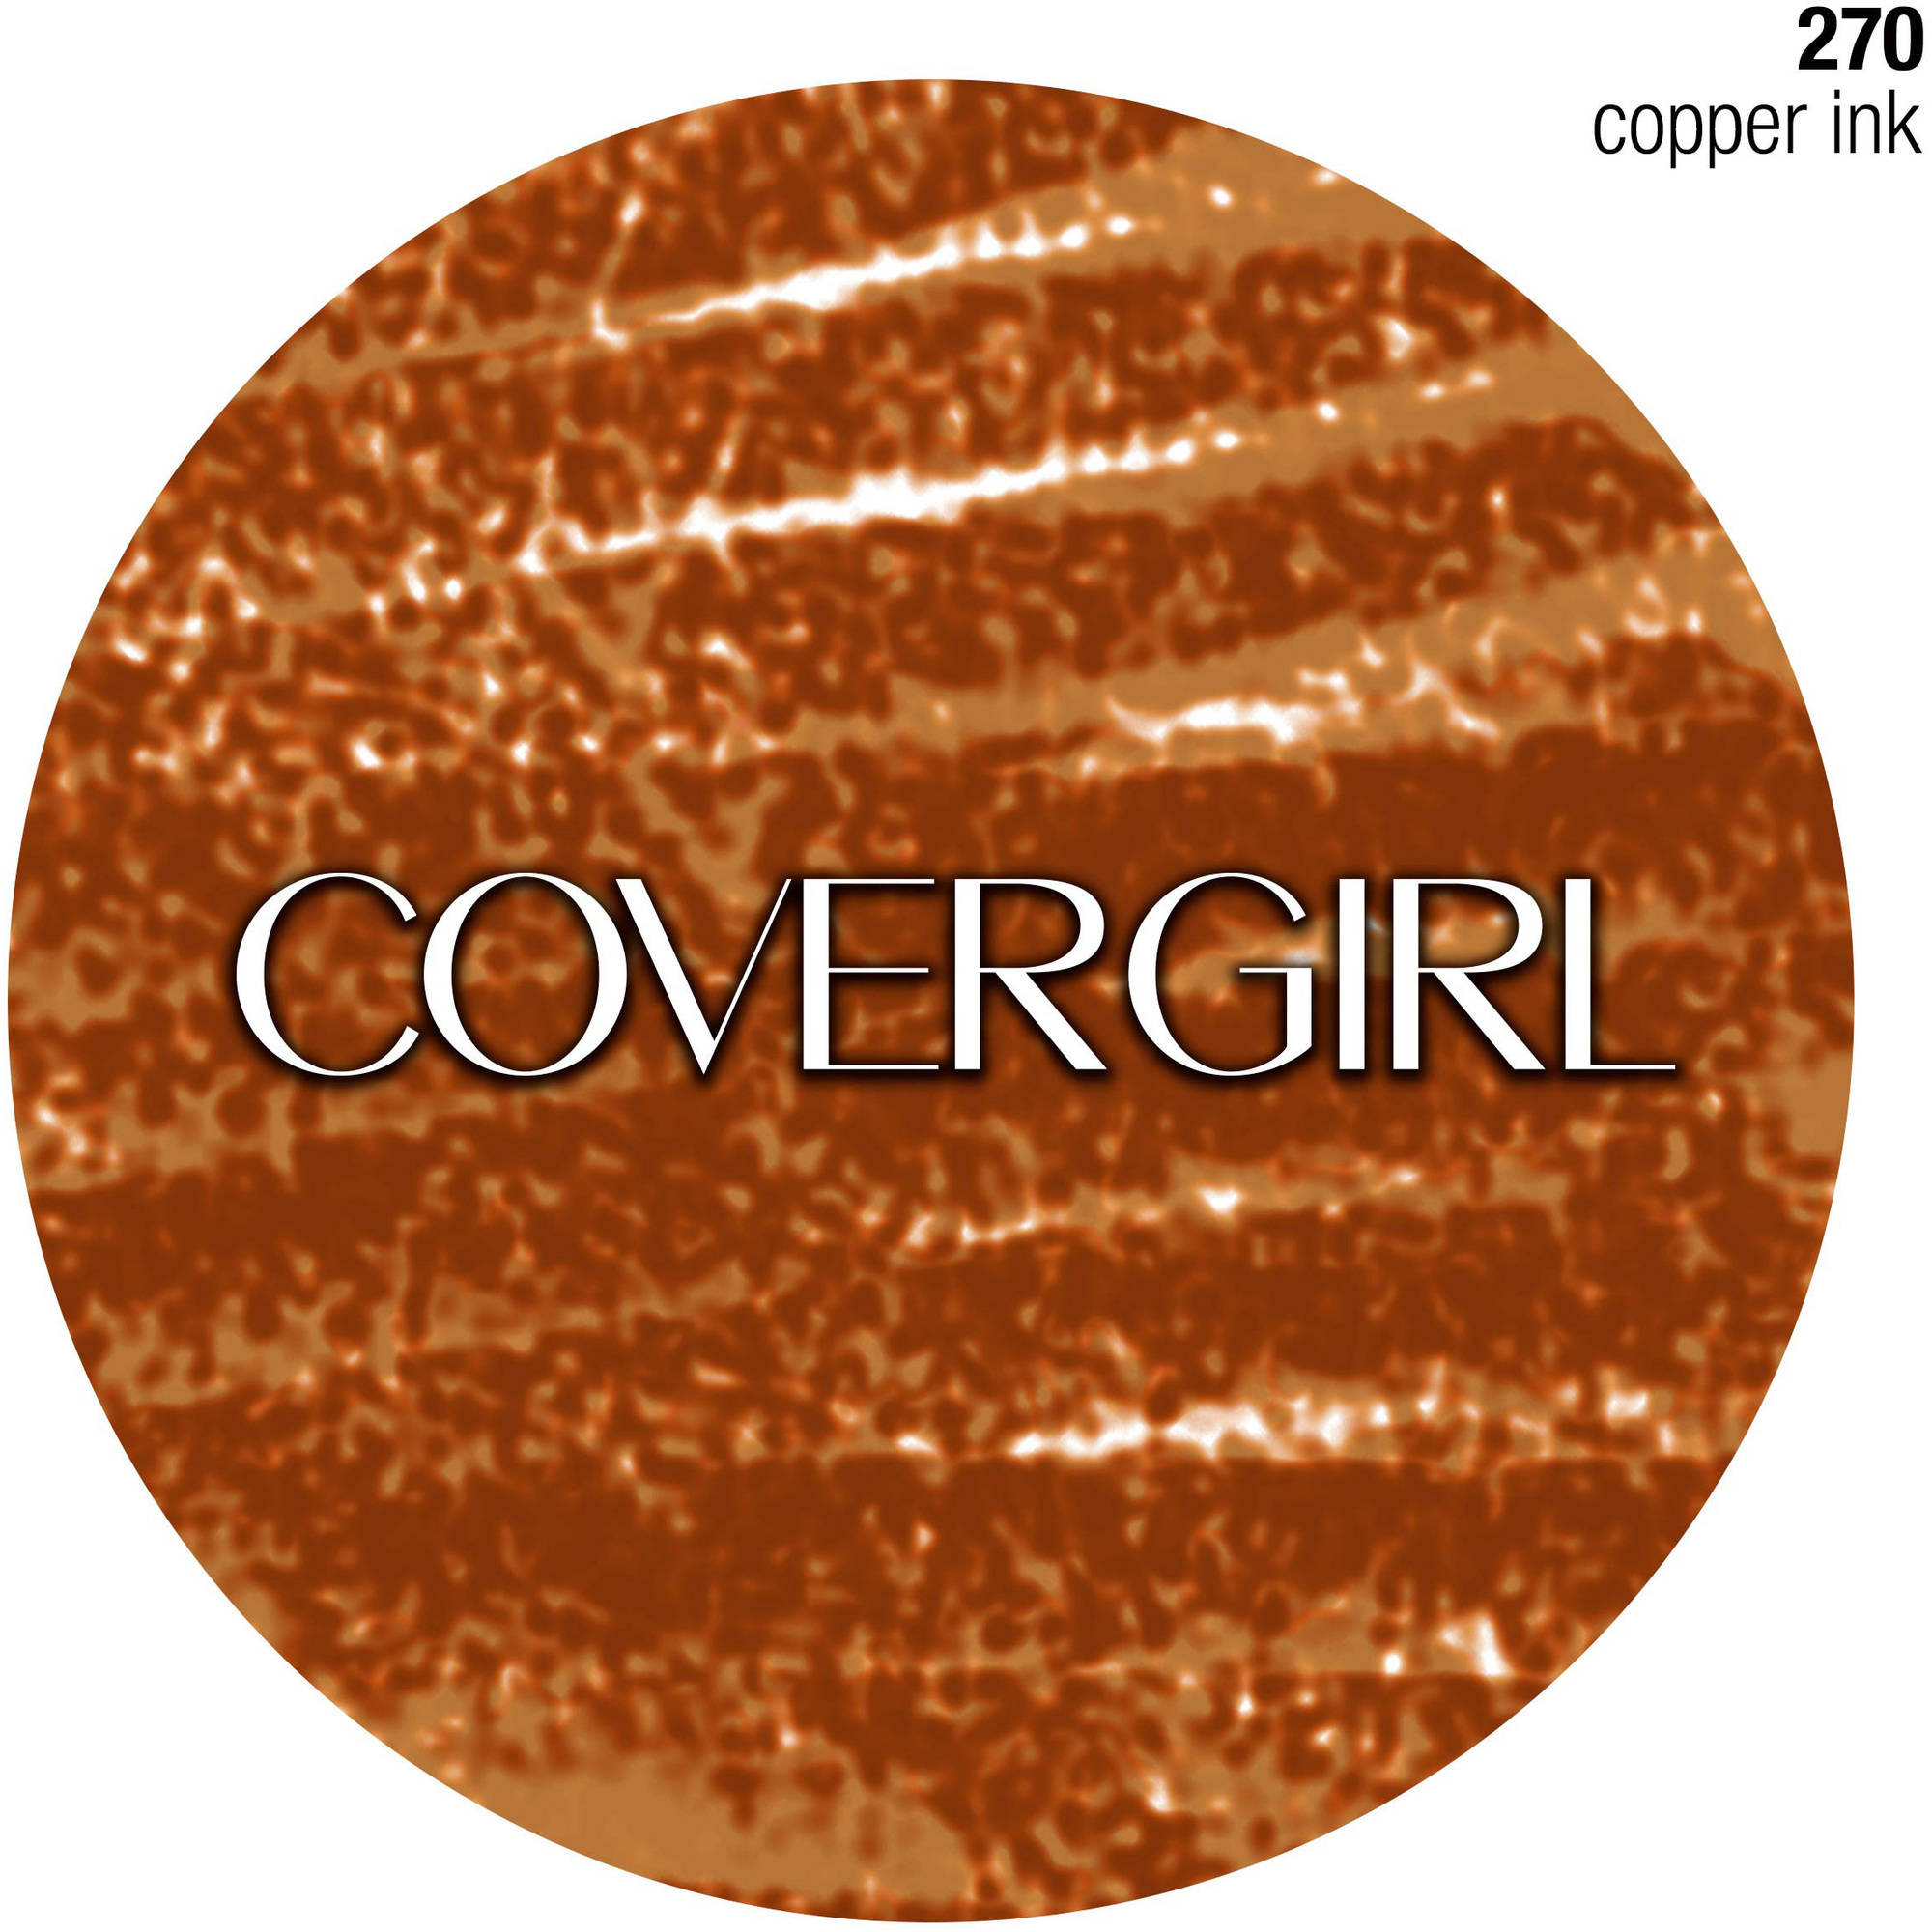 COVERGIRL Ink It! by Perfect Point Plus Gel Eyeliner, 270 Copper Ink - image 4 of 5